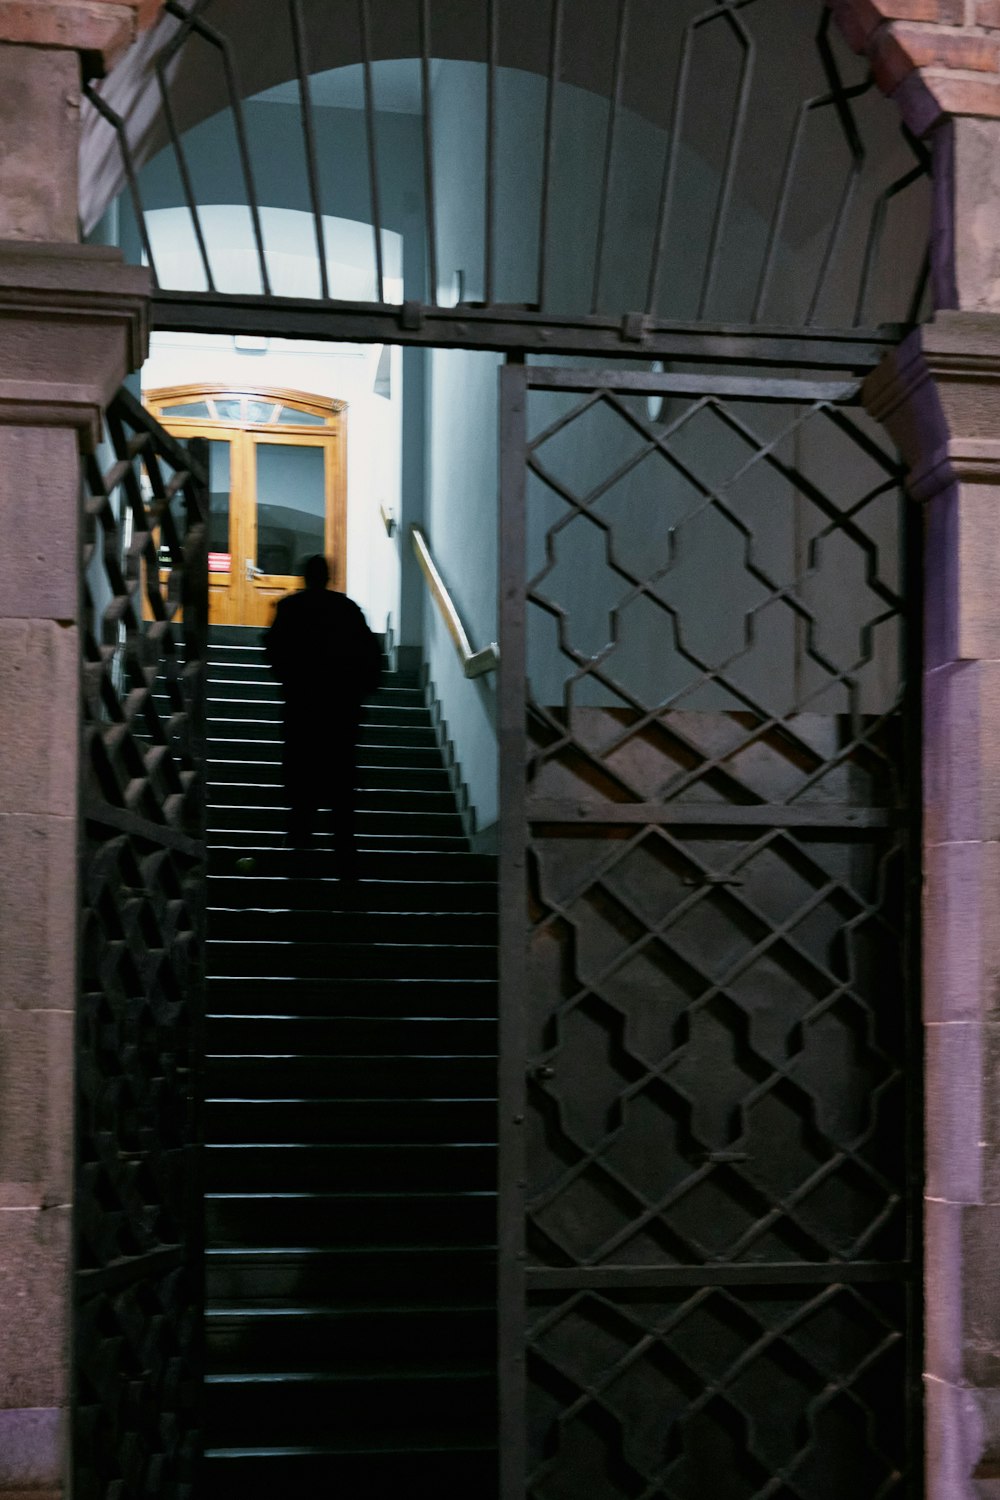 a person walking up a set of stairs